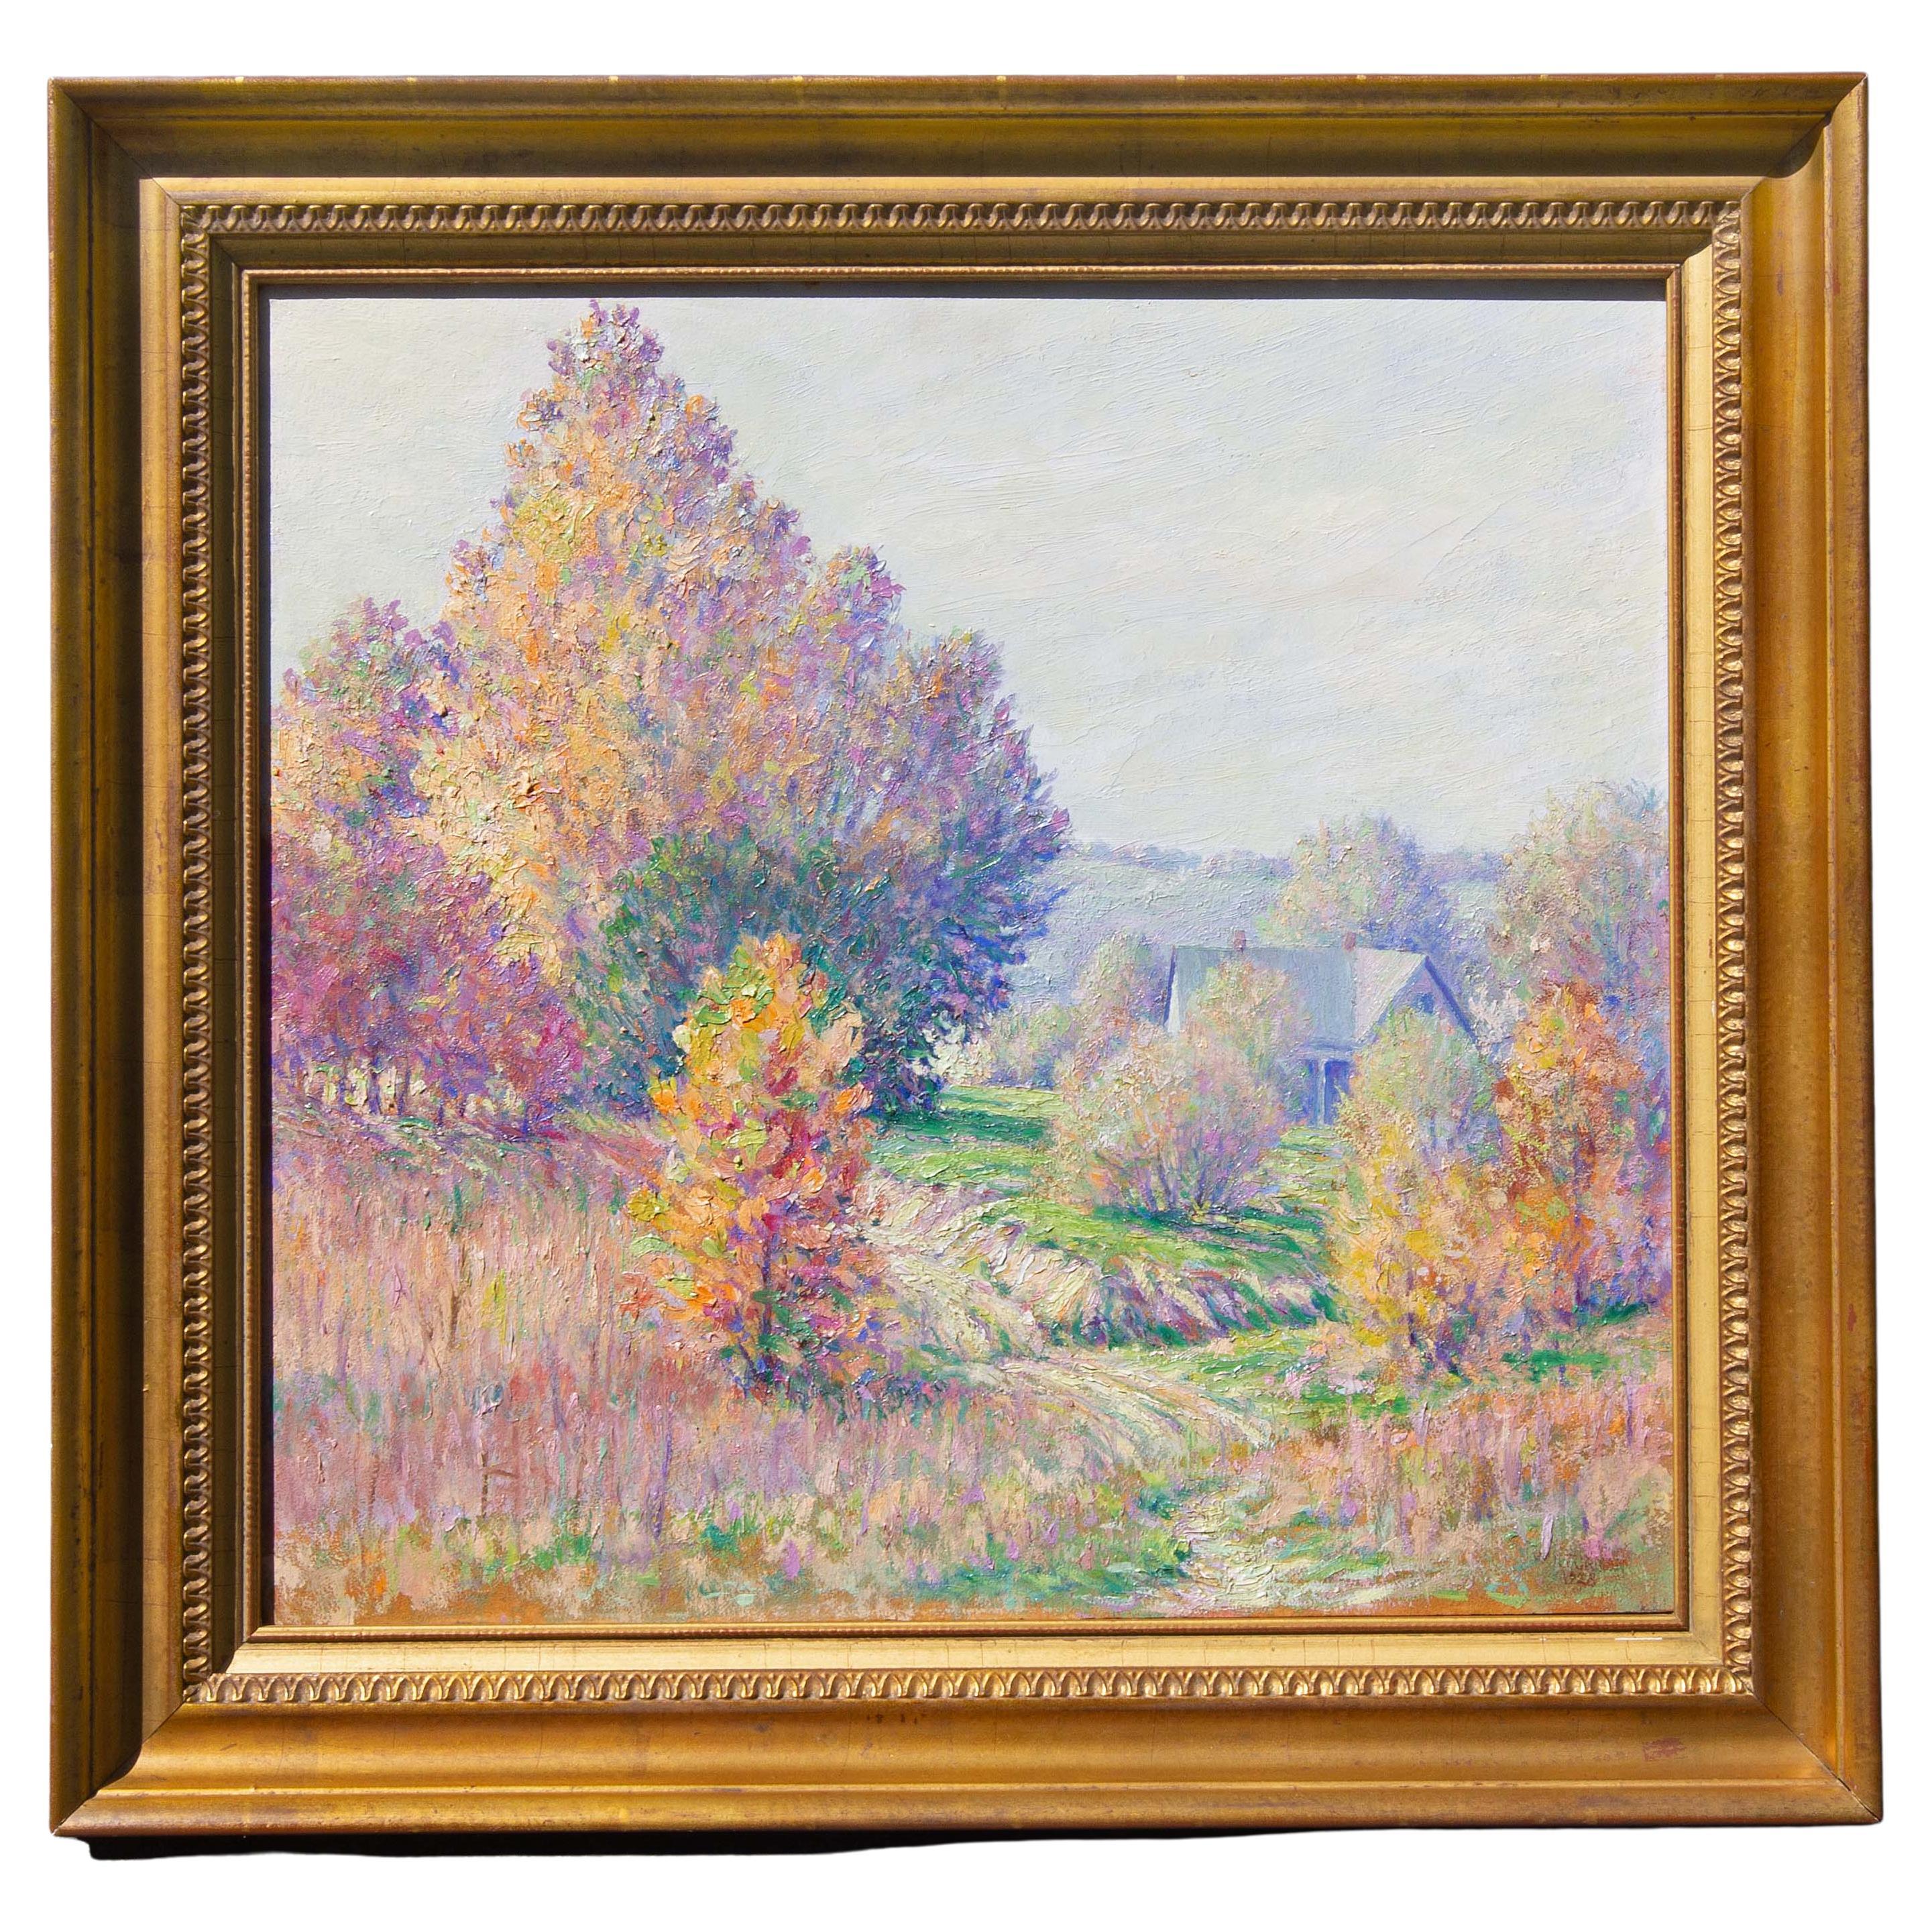 American impressionist summer landscape painting by William T. Turman. Soft pastel colors. Oil on board. Signed lower right and dated 1928. Indiana Art Association exhibition label on reverse. In a good quality real gold leaf frame.
Presented by